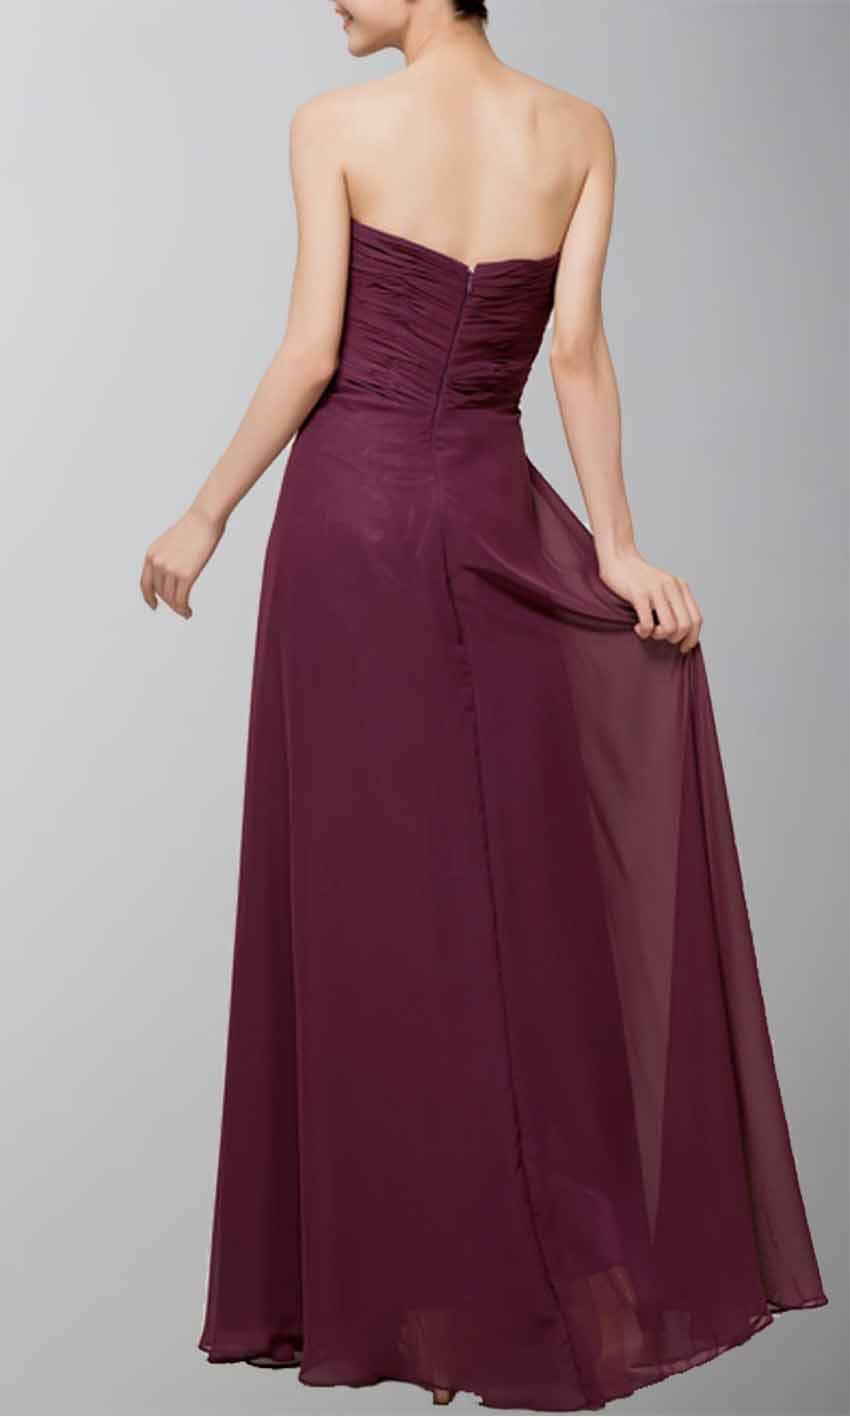 Hochzeit - Dark Purple Fancy Chiffon Bridesmaid Prom Dress KSP060 [KSP060] - £83.00 : Cheap Prom Dresses Uk, Bridesmaid Dresses, 2014 Prom & Evening Dresses, Look for cheap elegant prom dresses 2014, cocktail gowns, or dresses for special occasions? kissprom.co.uk o